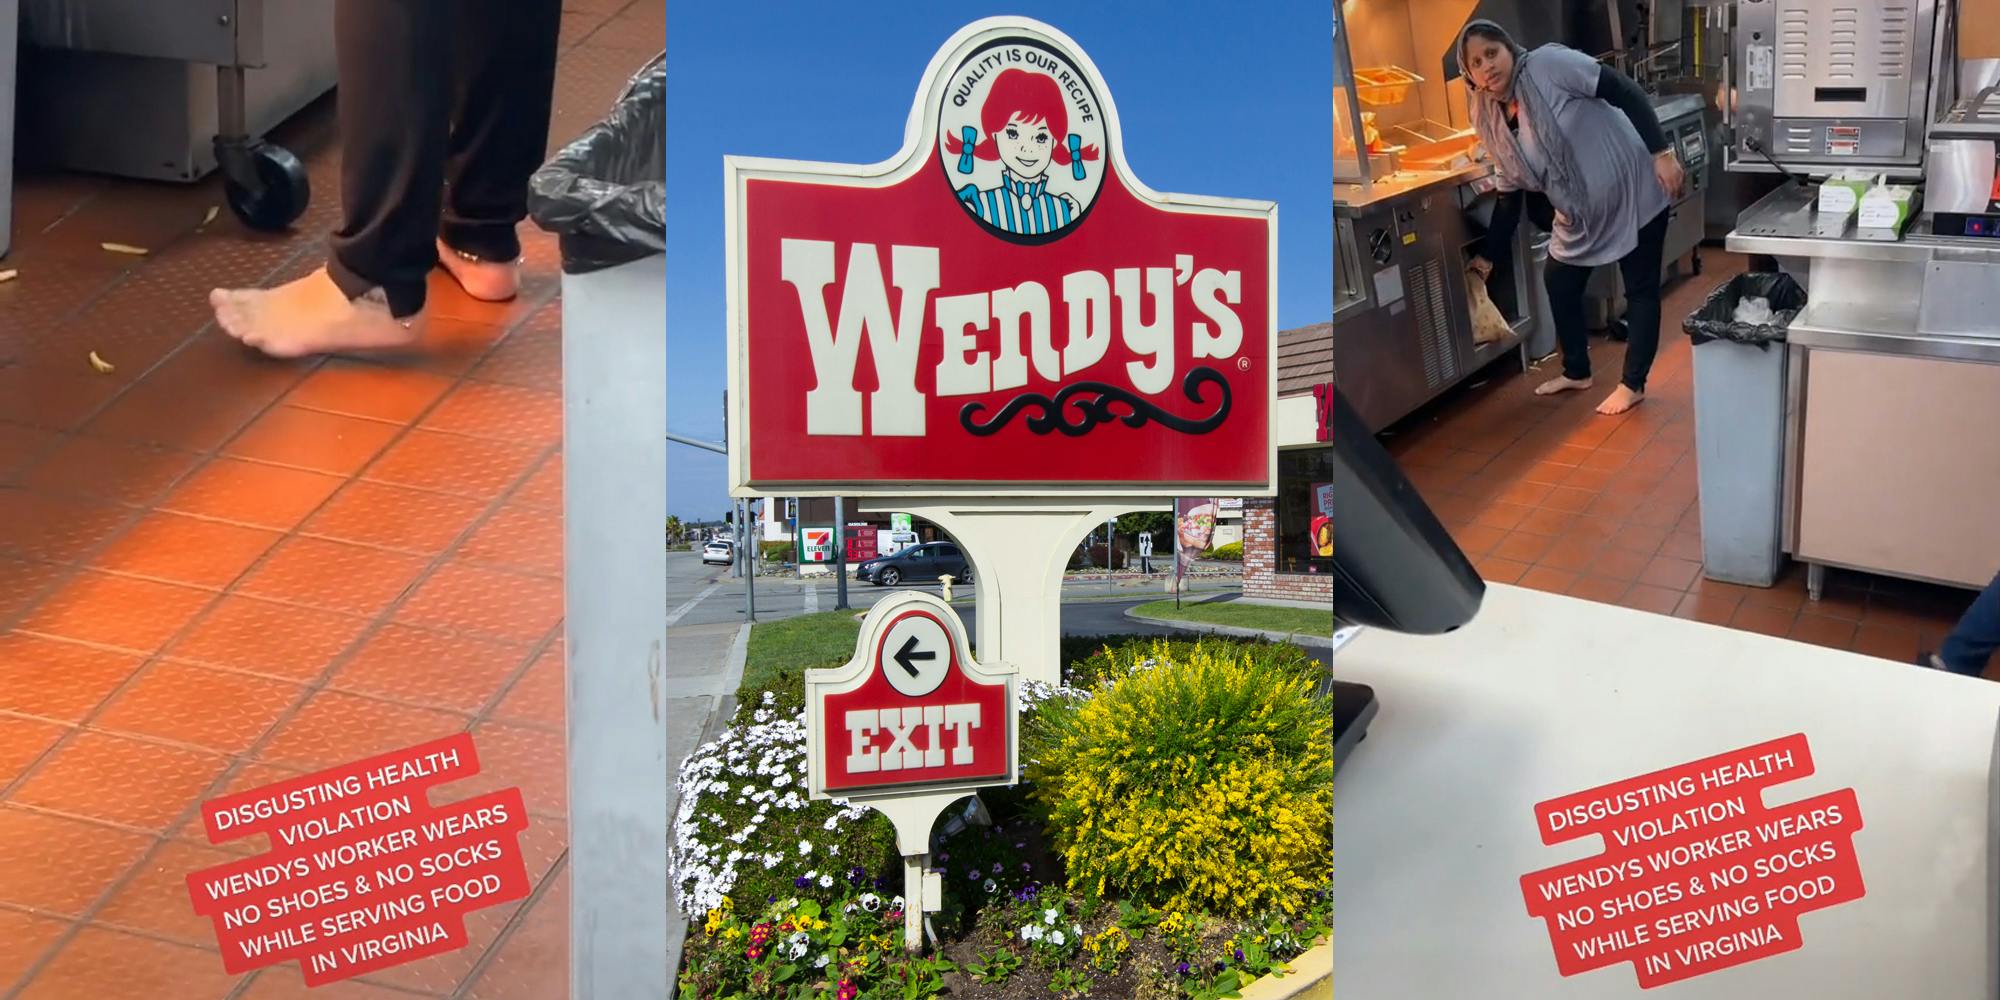 Wendy's employee working with bare feet with caption "DISGUSTING HEALTH VIOLATION WENDYS WORKER WEARS NO SHOES & NO SOCKS WHILE SERVING FOOD IN VIRGINIA" (l) Wendy's sign outside (c) Wendy's employee working with bare feet with caption "DISGUSTING HEALTH VIOLATION WENDYS WORKER WEARS NO SHOES & NO SOCKS WHILE SERVING FOOD IN VIRGINIA" (r)